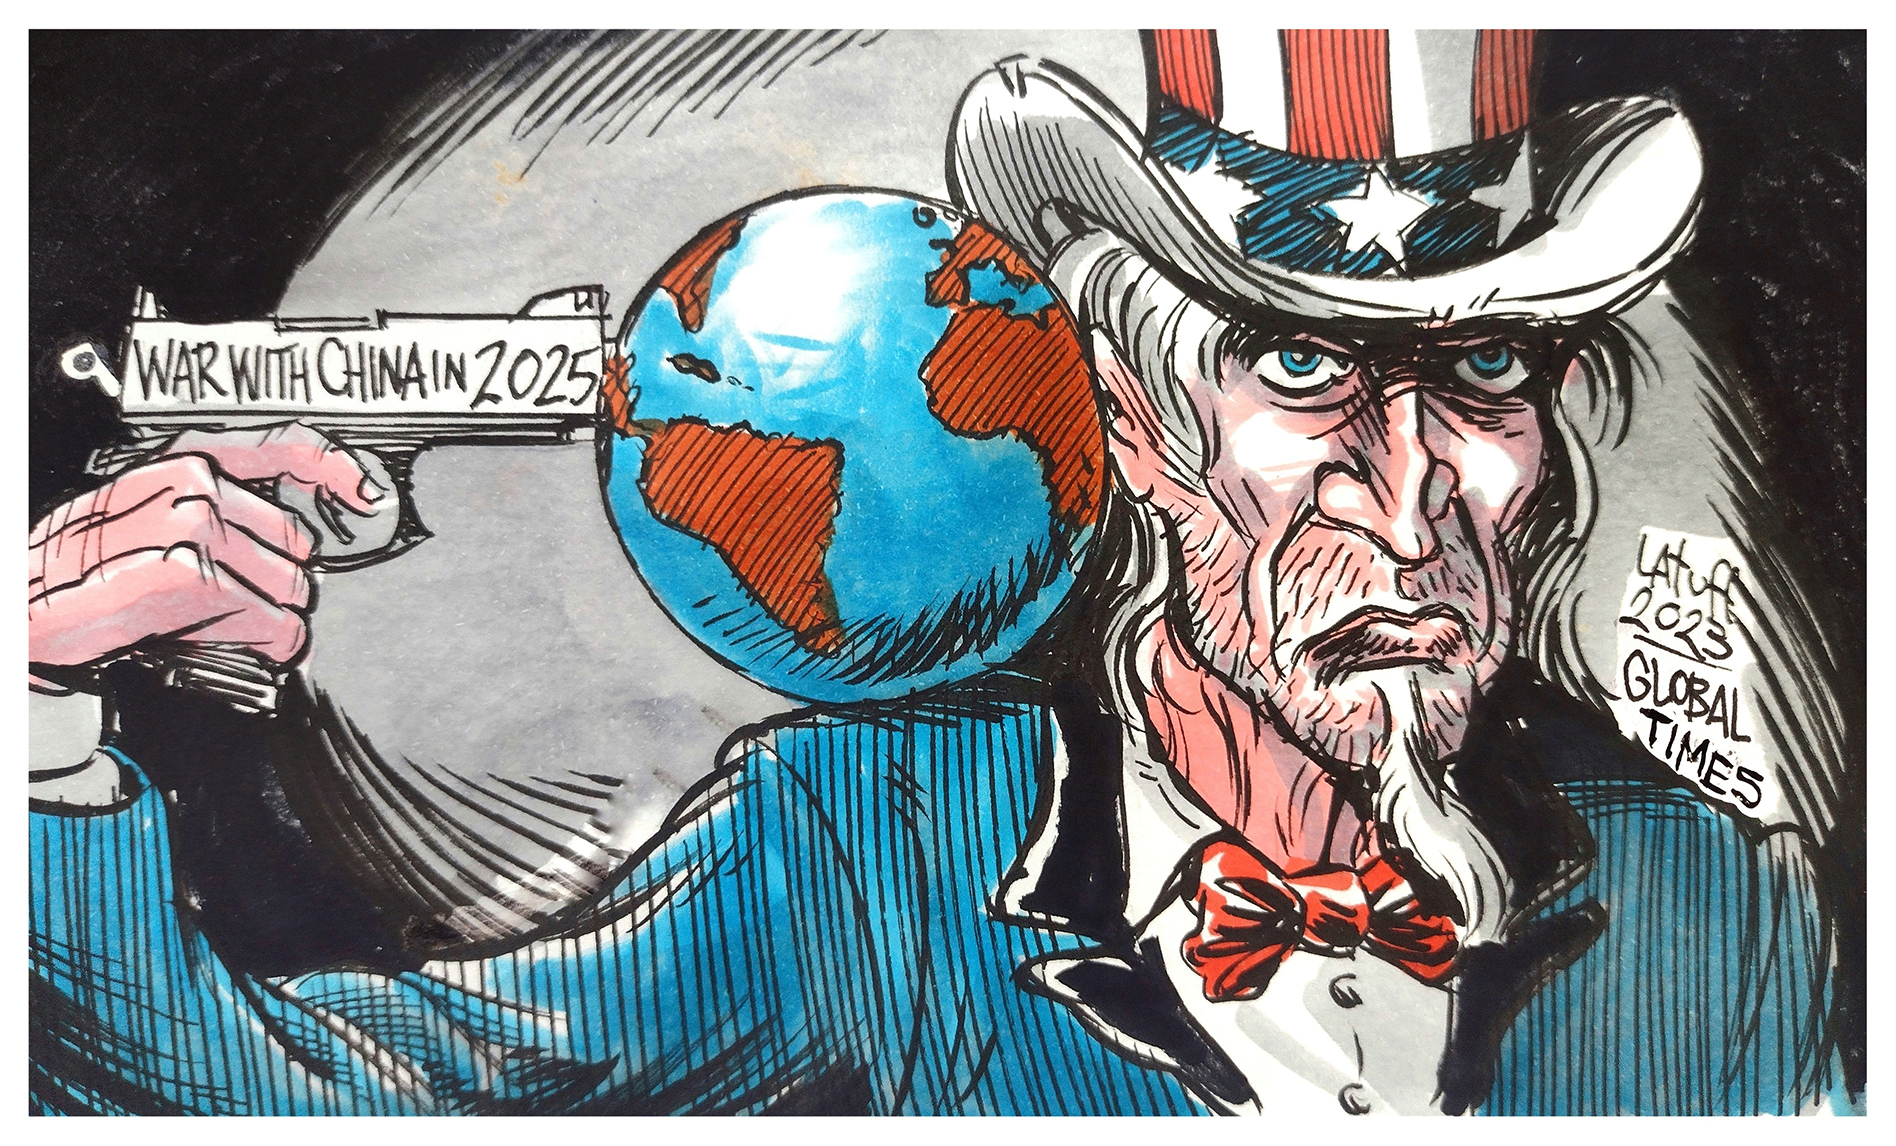 Uncle Sam attempts to drag the whole world into its war game by hyping war with China in 2025. Cartoon: Carlos Latuff